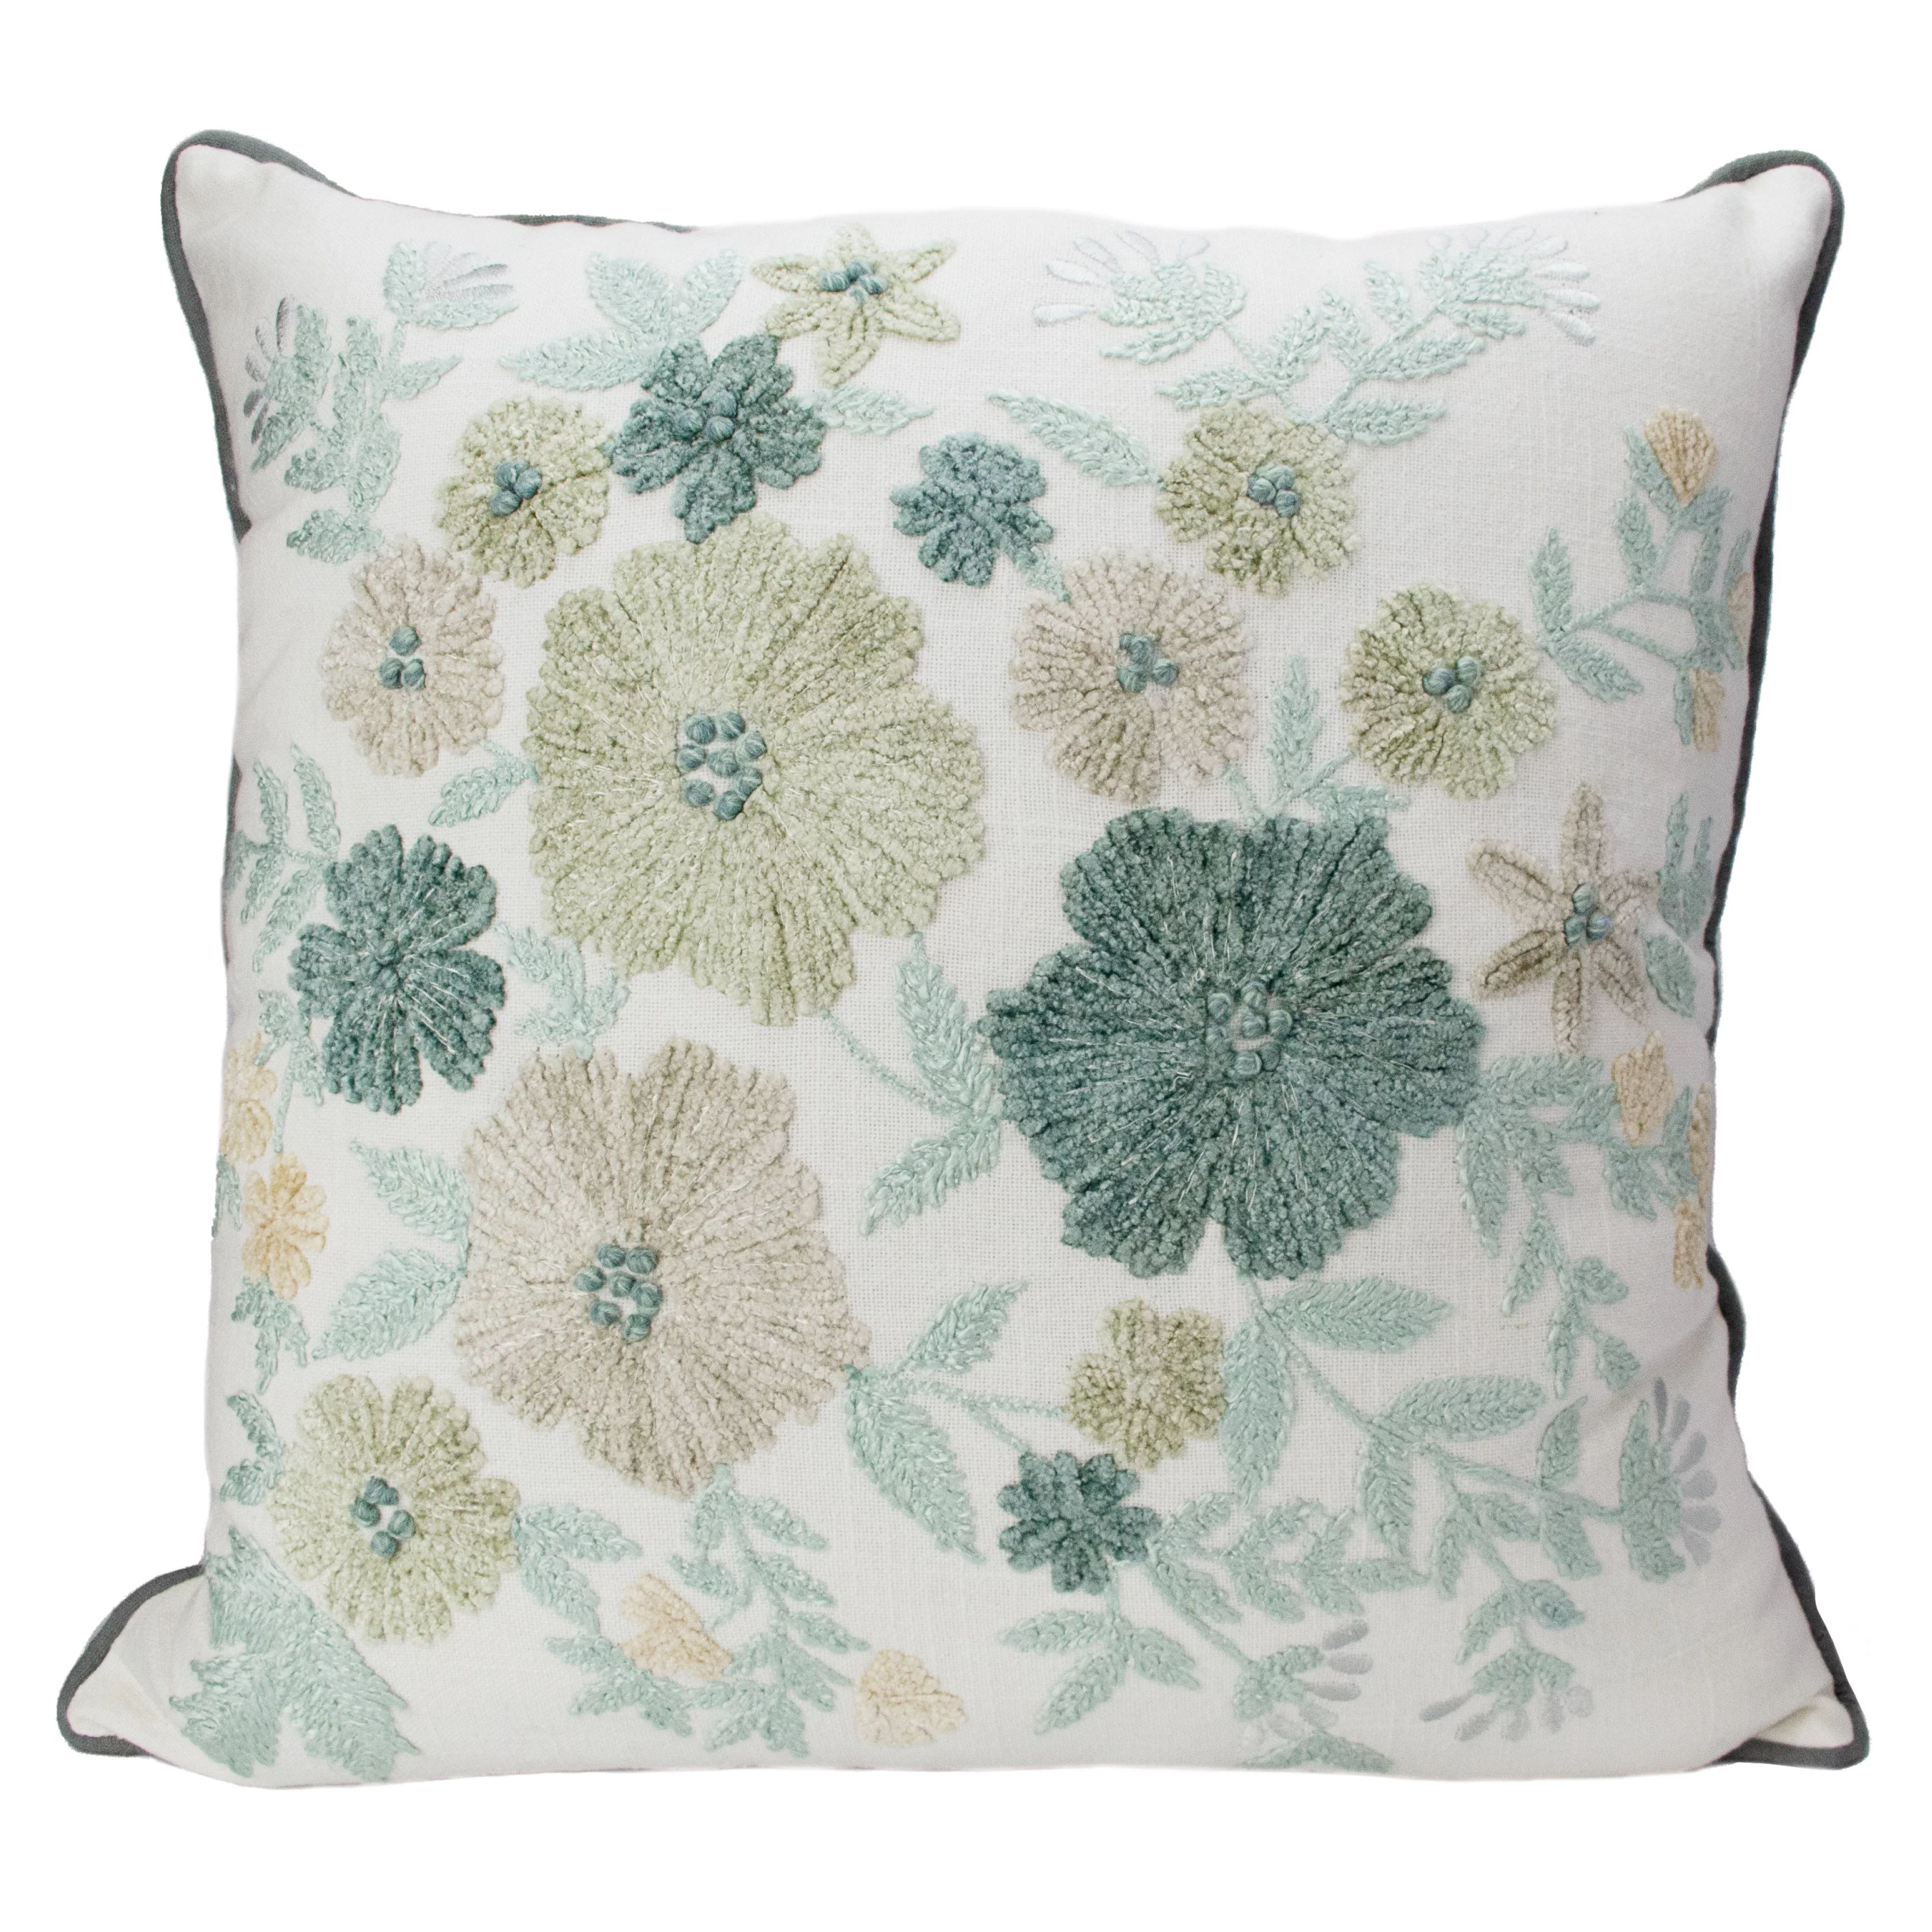 Style House Cotton Embroidered Floral Square Decorative Pillow 20" x 20", Blue | Walmart (US)